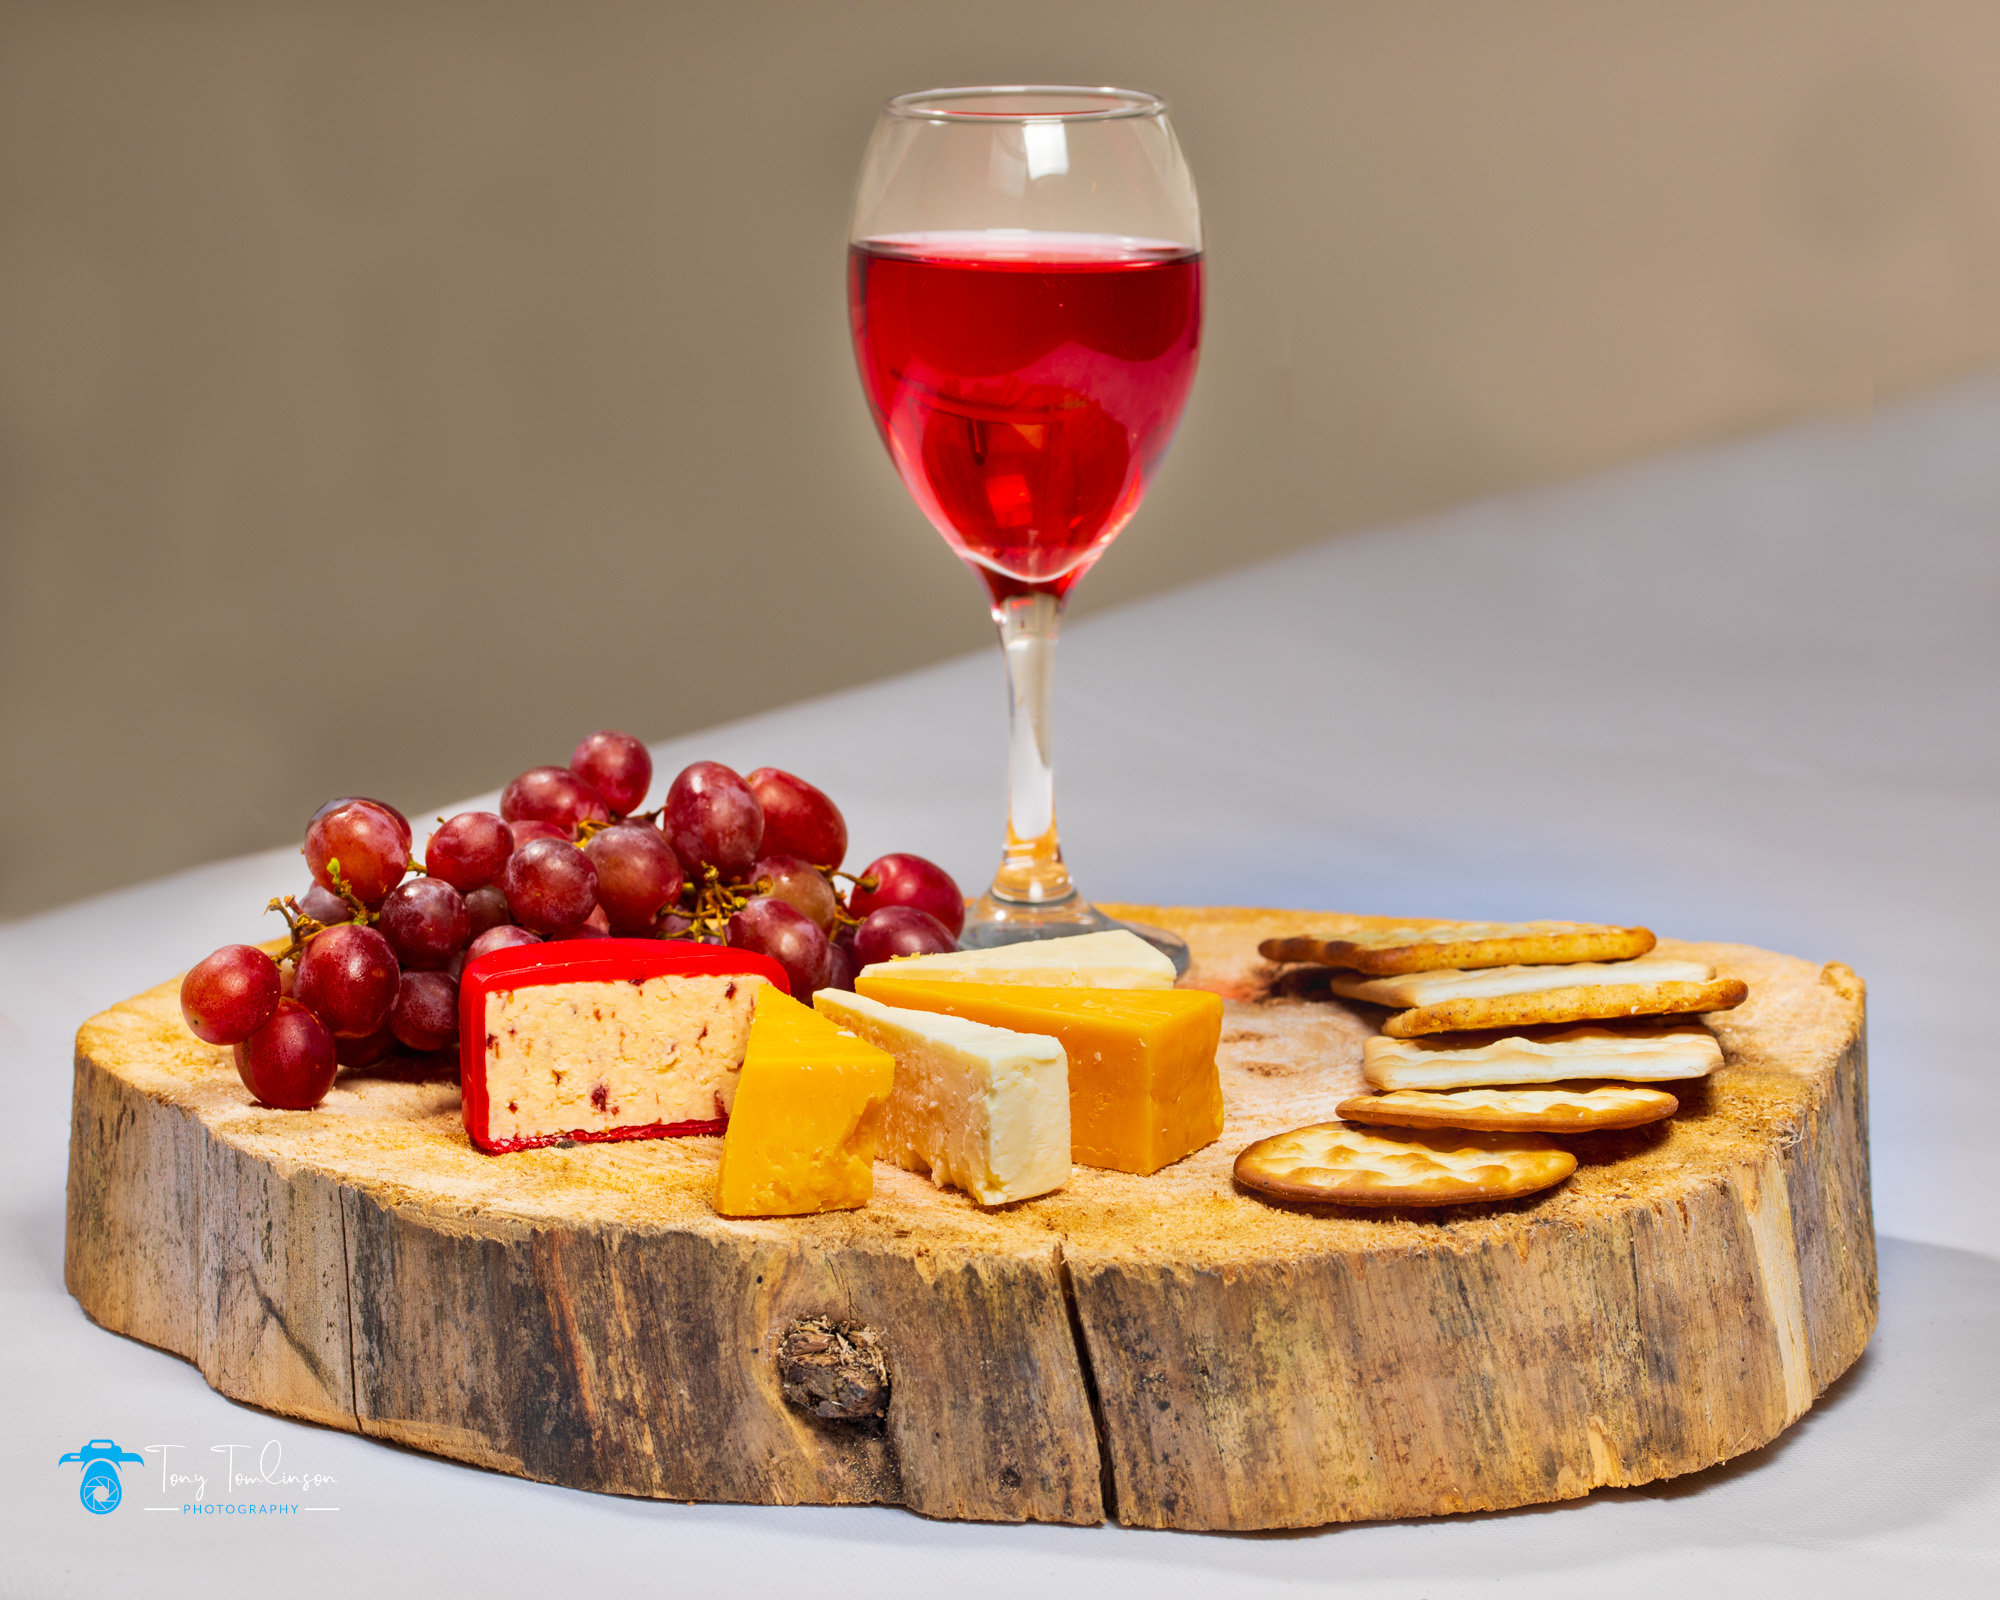 tony-tomlinson-photography-cheese-board-product-photography